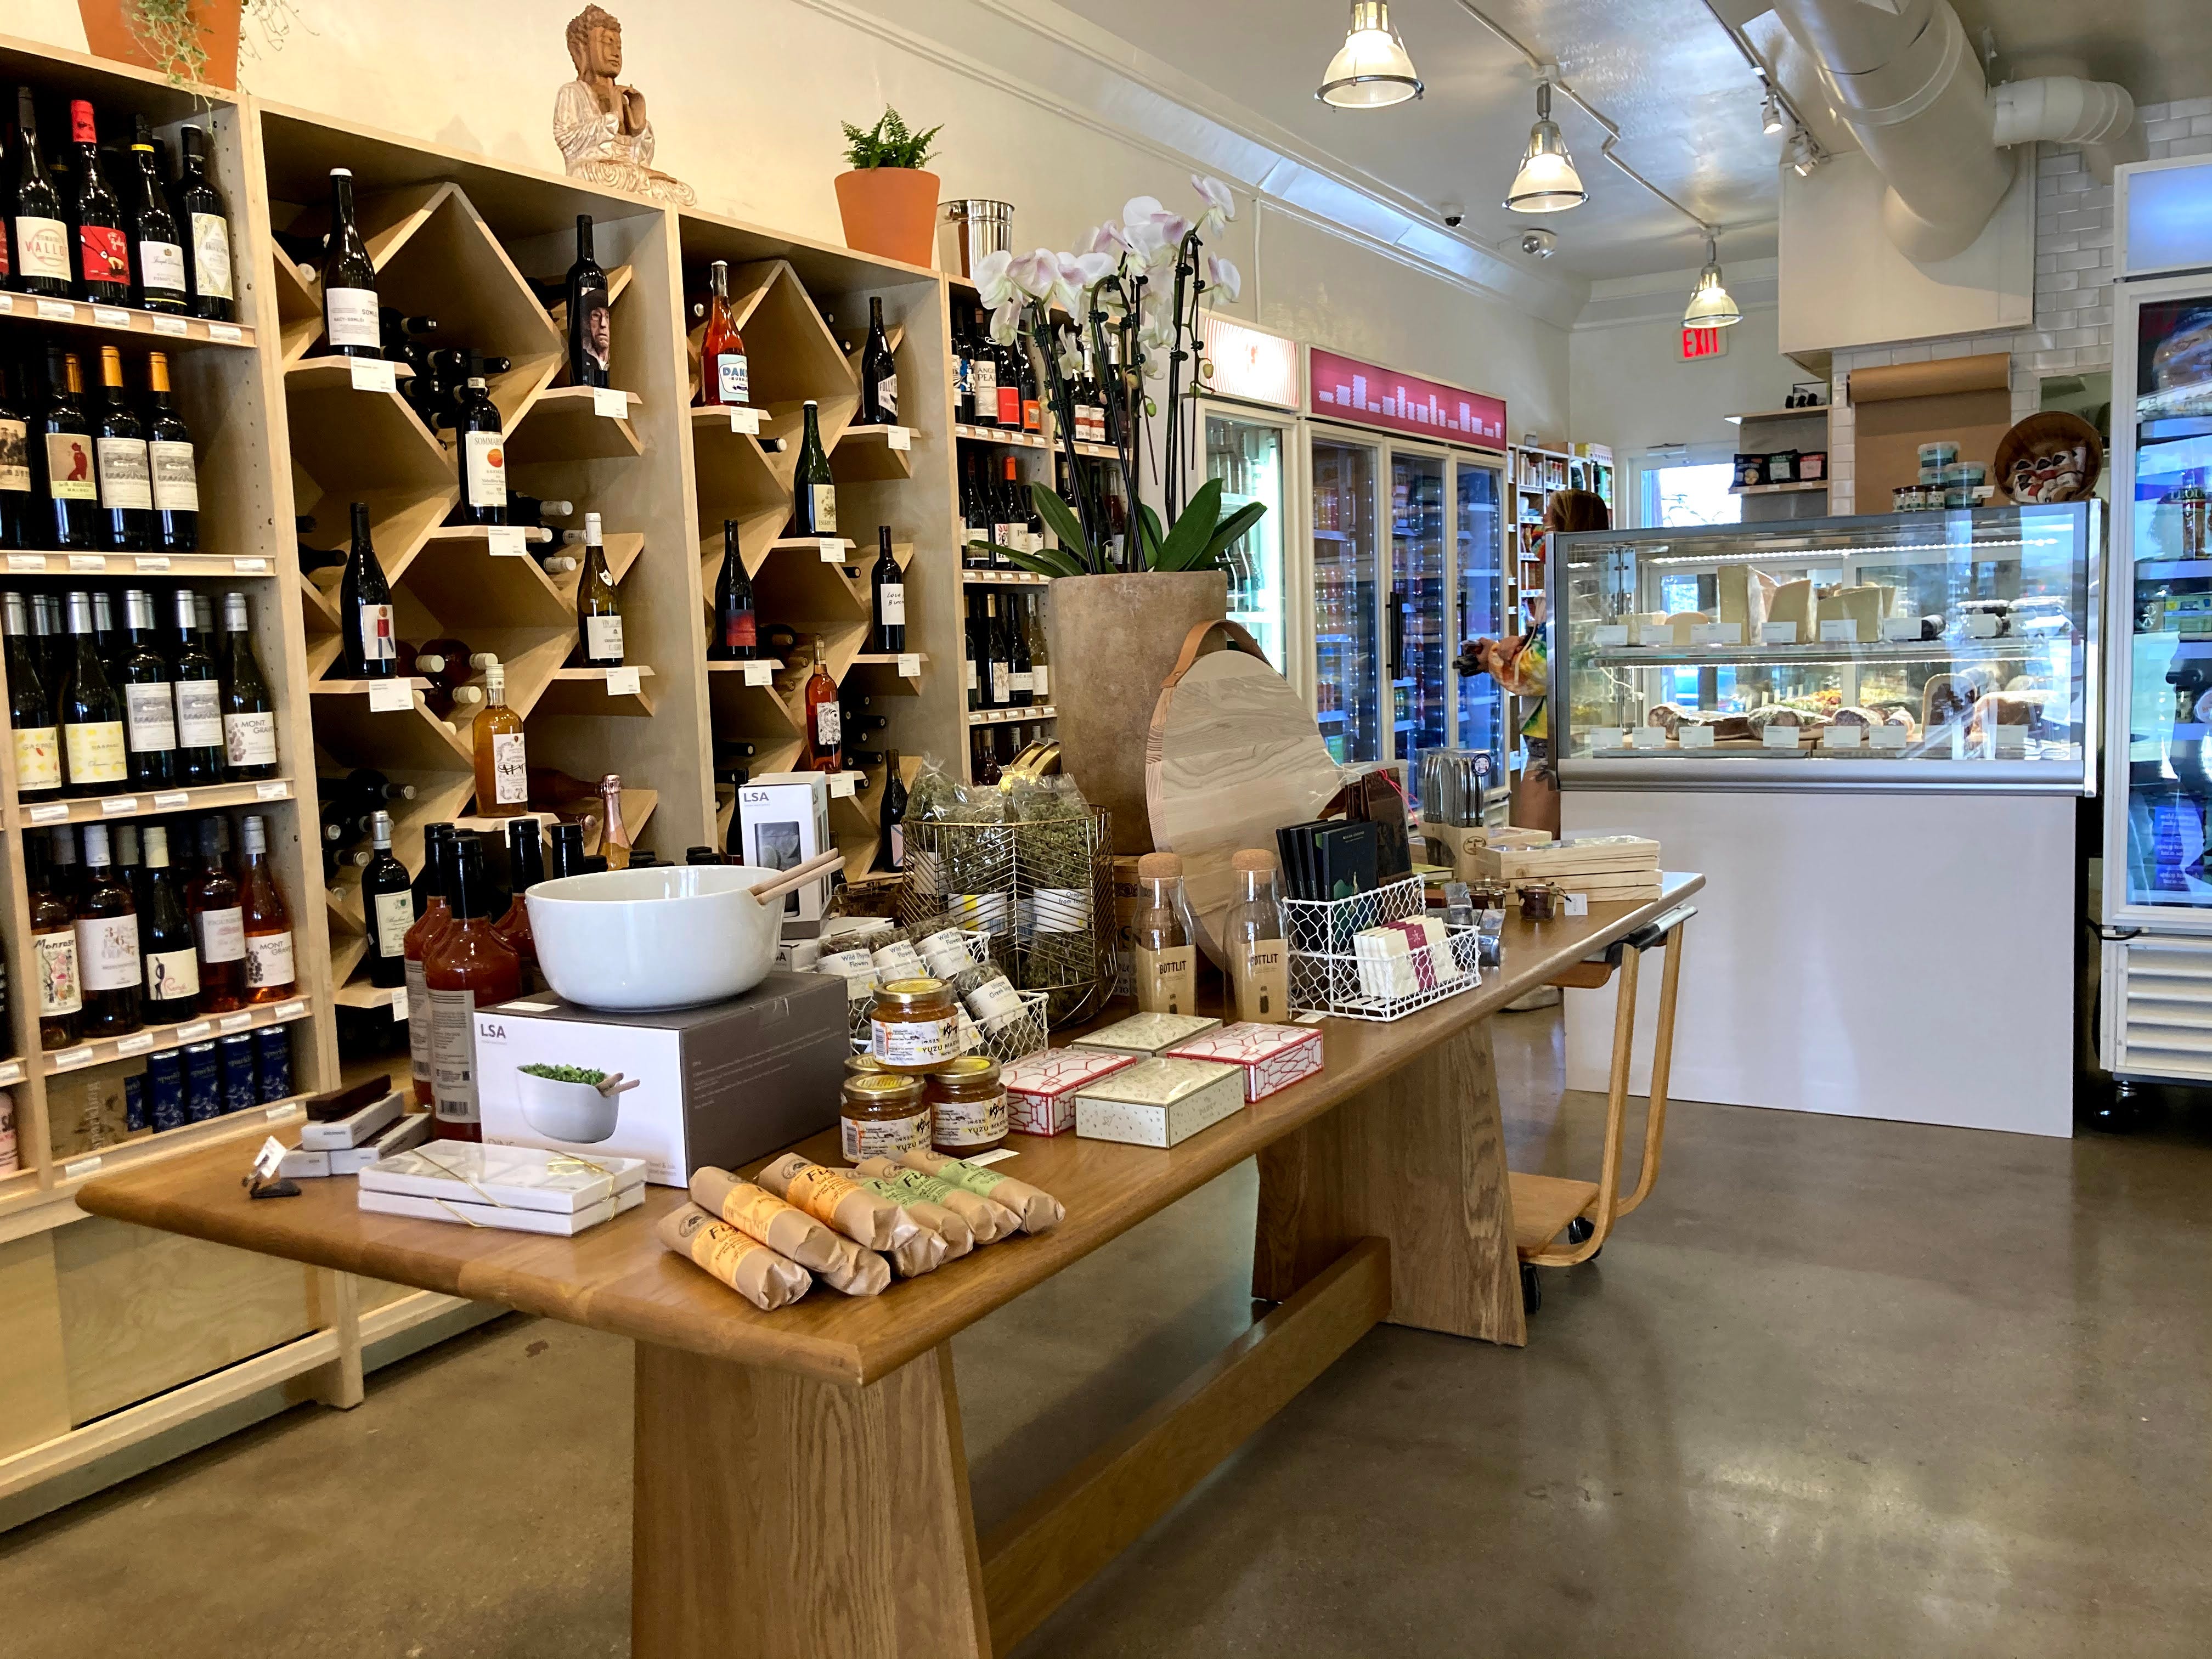 Tiny Grocer is a new neighborhood market on South Congress Avenue that opened recently with a curated selection of snacks, condiments, wines, fresh produce and some prepared foods.